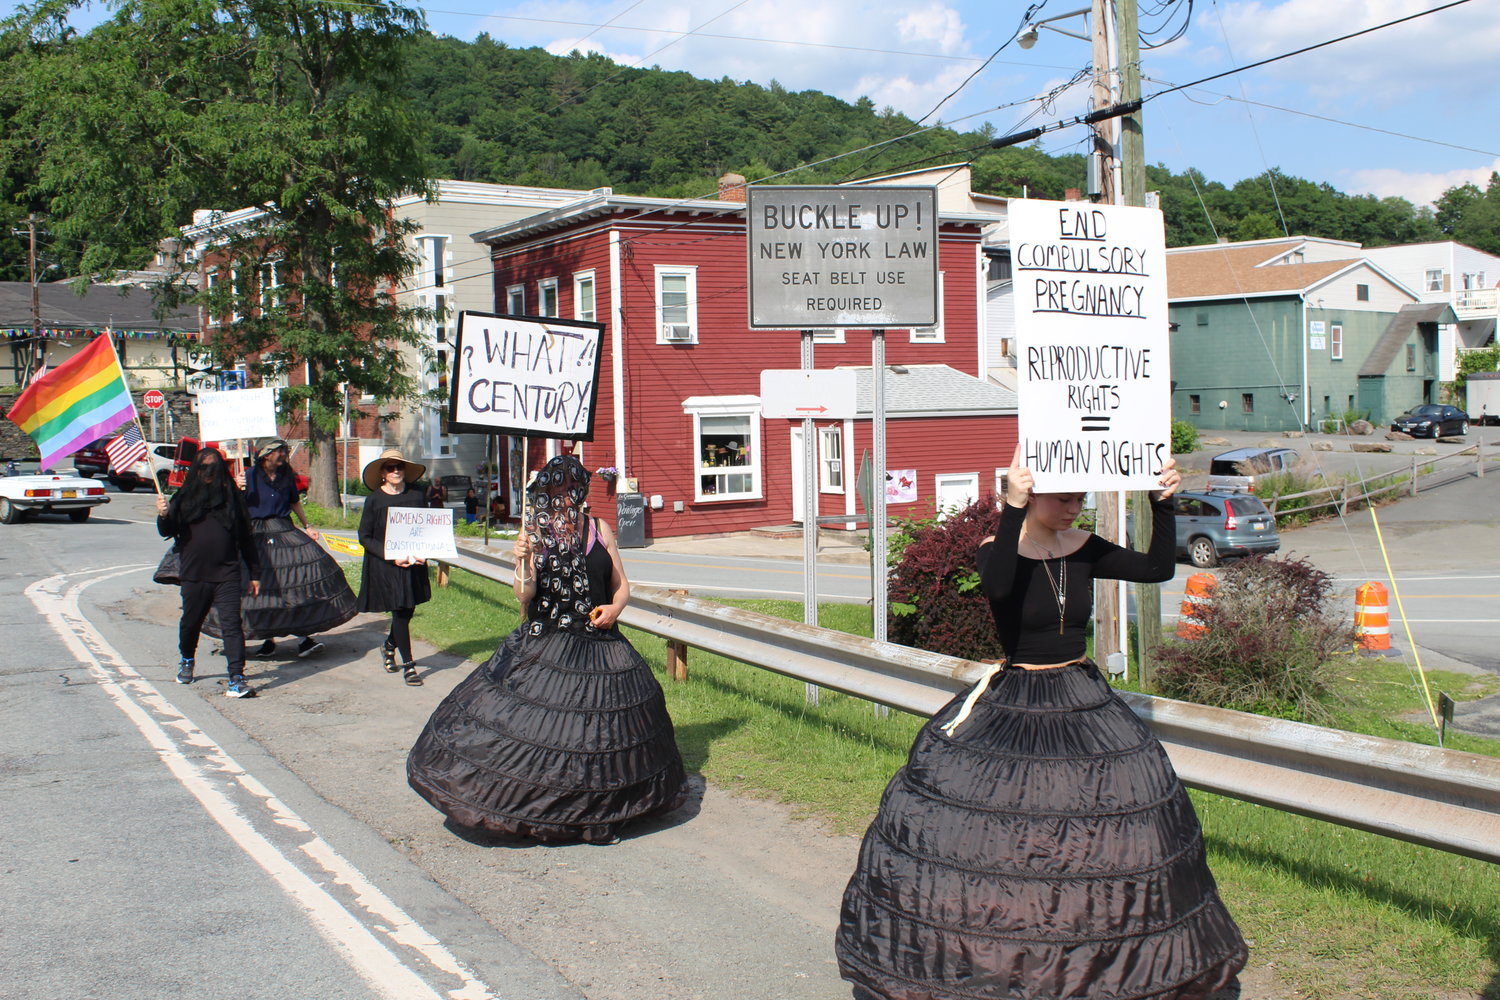 Clad in black, some wearing black hoop skirts, men, women and a child walked up and down the Callicoon bridge.